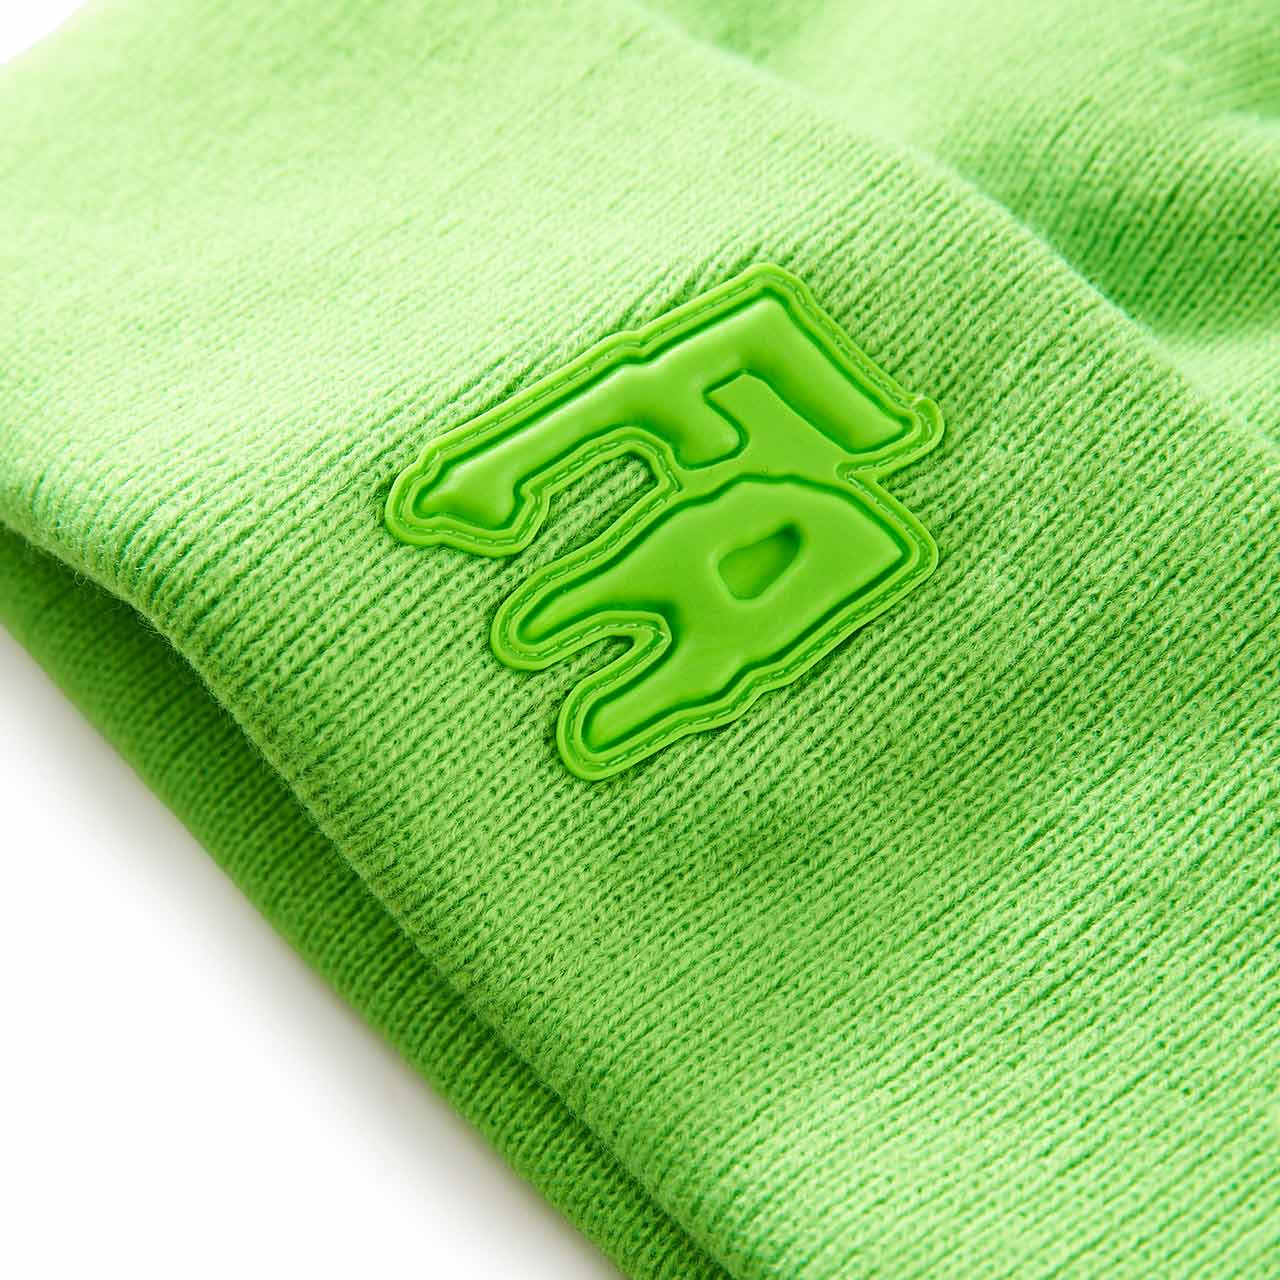 fucking awesome fucking awesome fa applique cuff beanie (neon green) P707111SPONESIZE